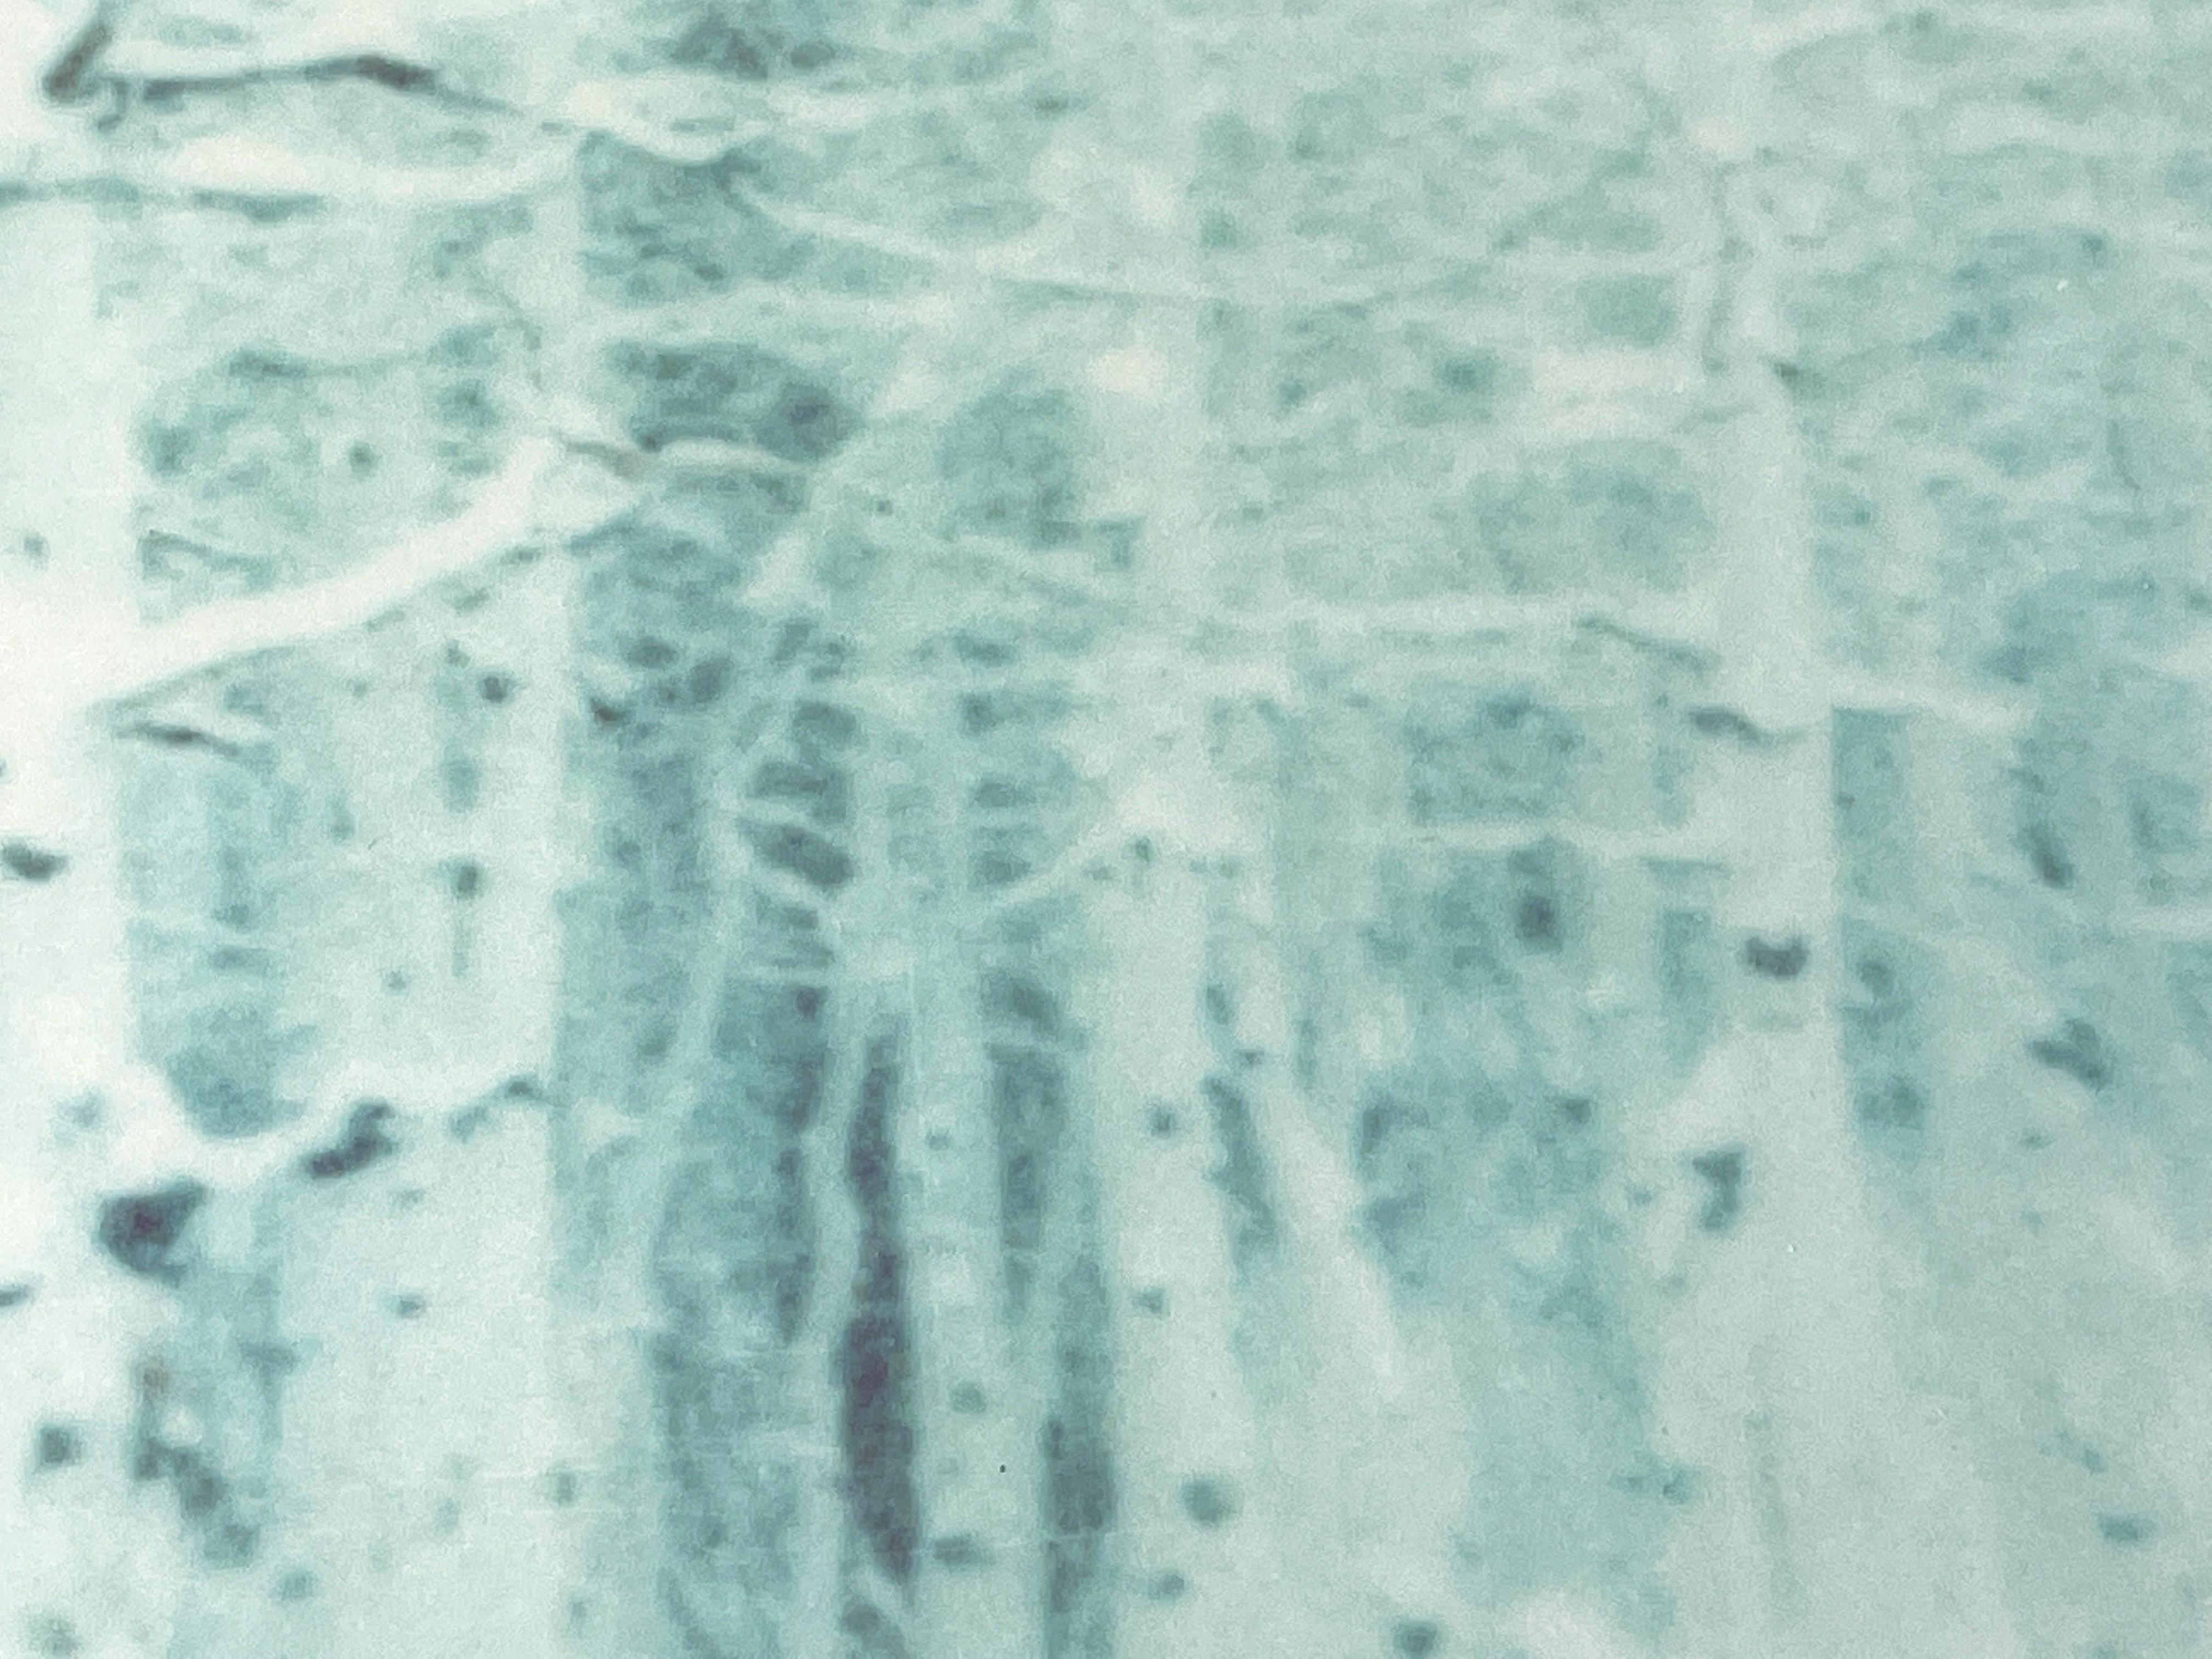 Winter (Wastelands) - Contemporary, Landscape, Polaroid - analog, mounted For Sale 3